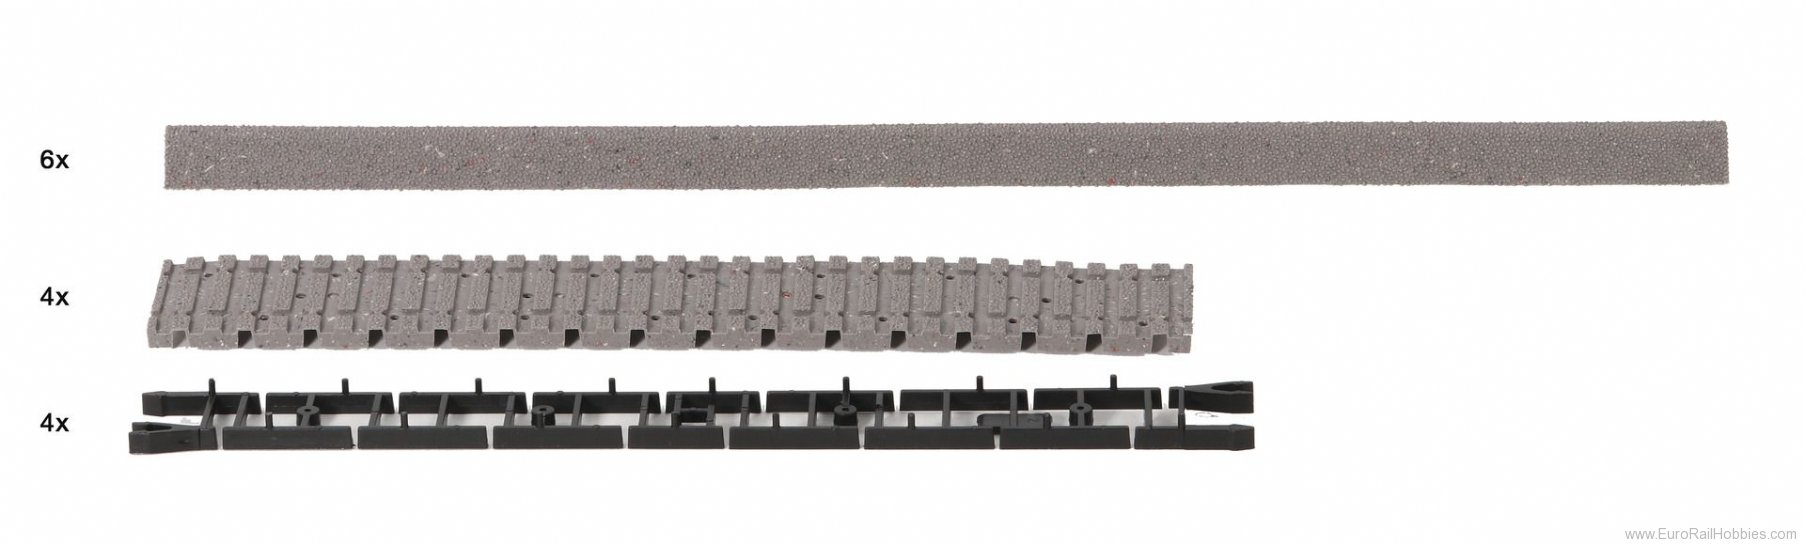 Roco 42660 Track bed  (RocoLine with Track Bed)